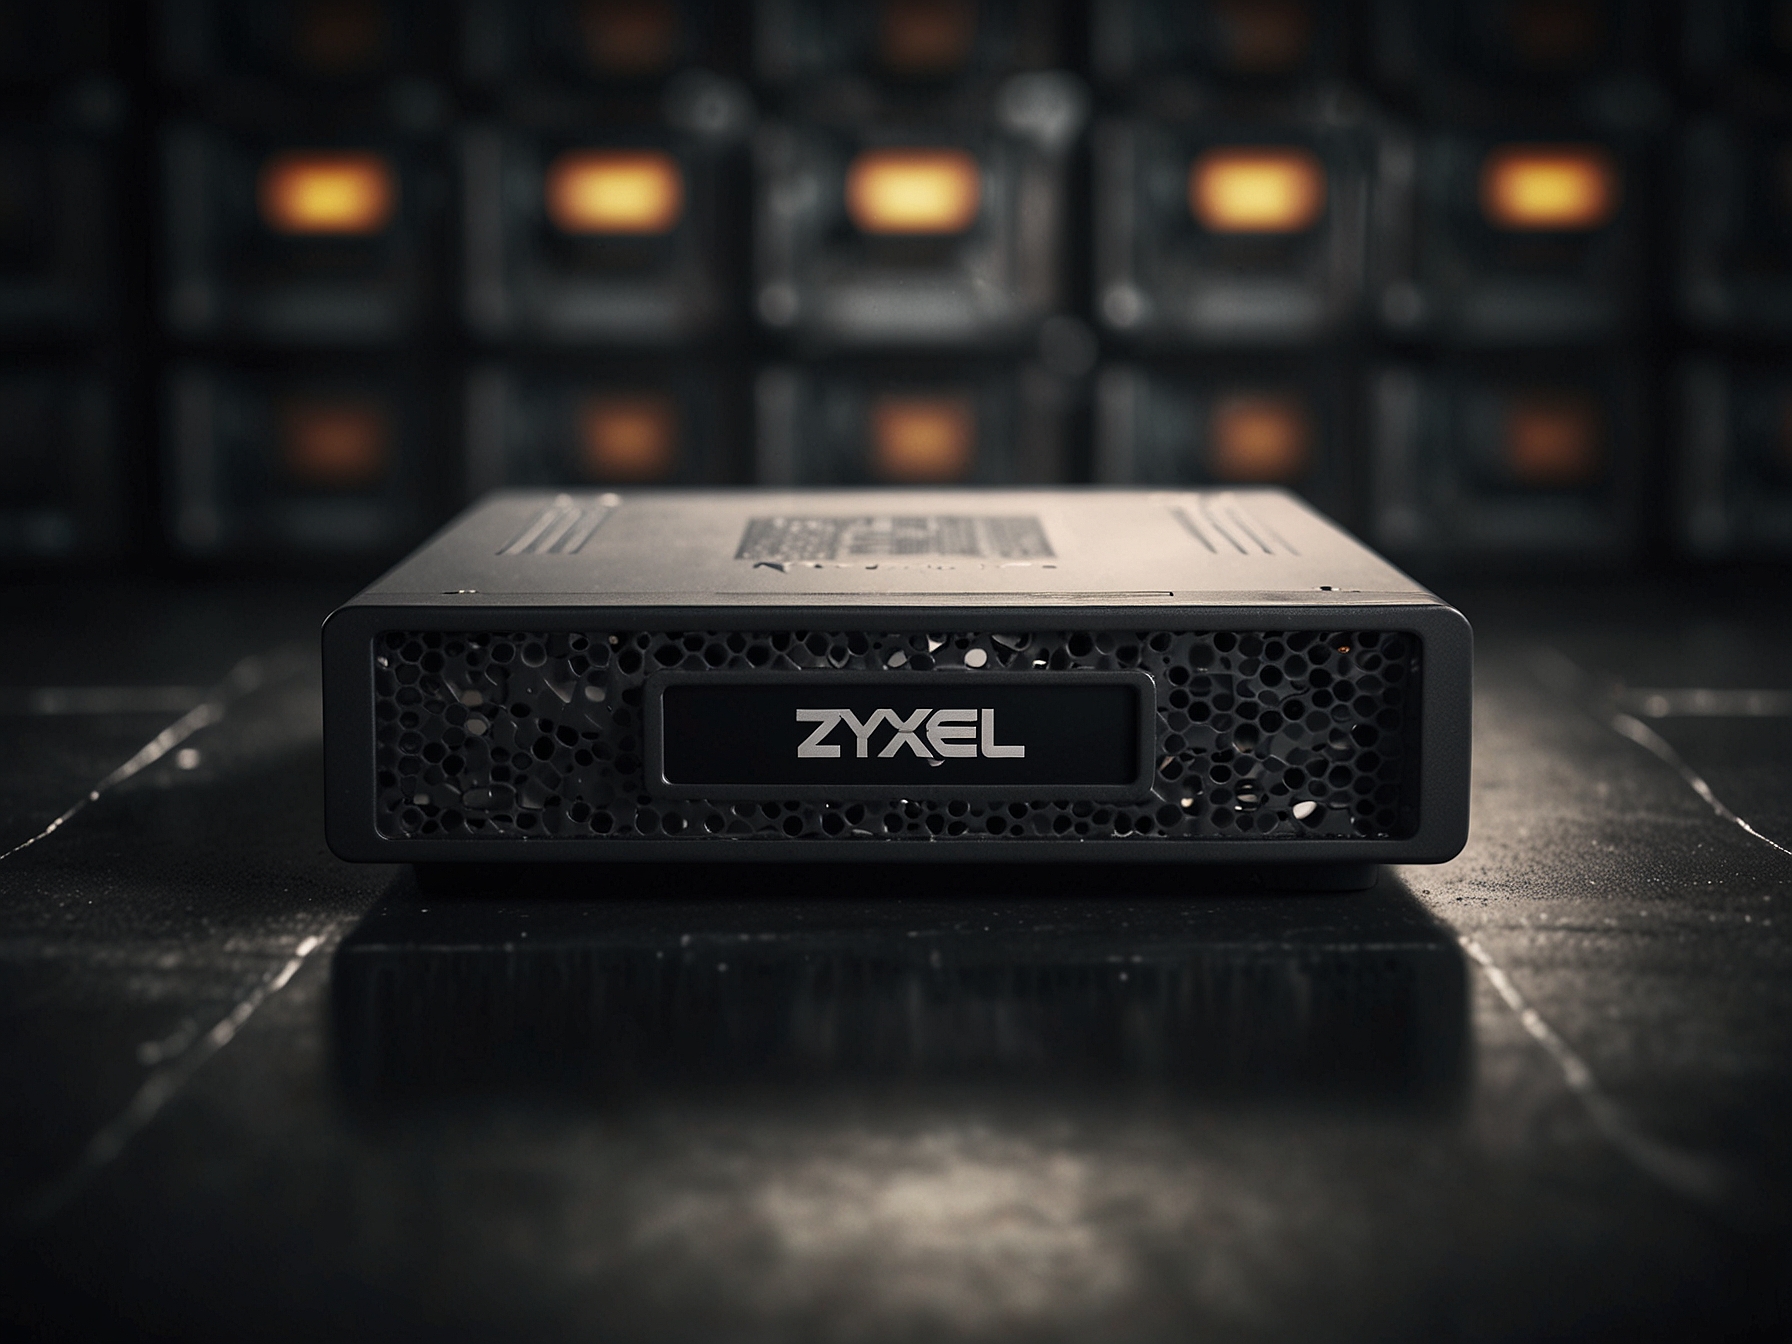 A close-up of a Zyxel NAS device with a caution symbol representing the newly discovered Mirai-esque botnet targeting outdated models, illustrating the urgent need for security updates.